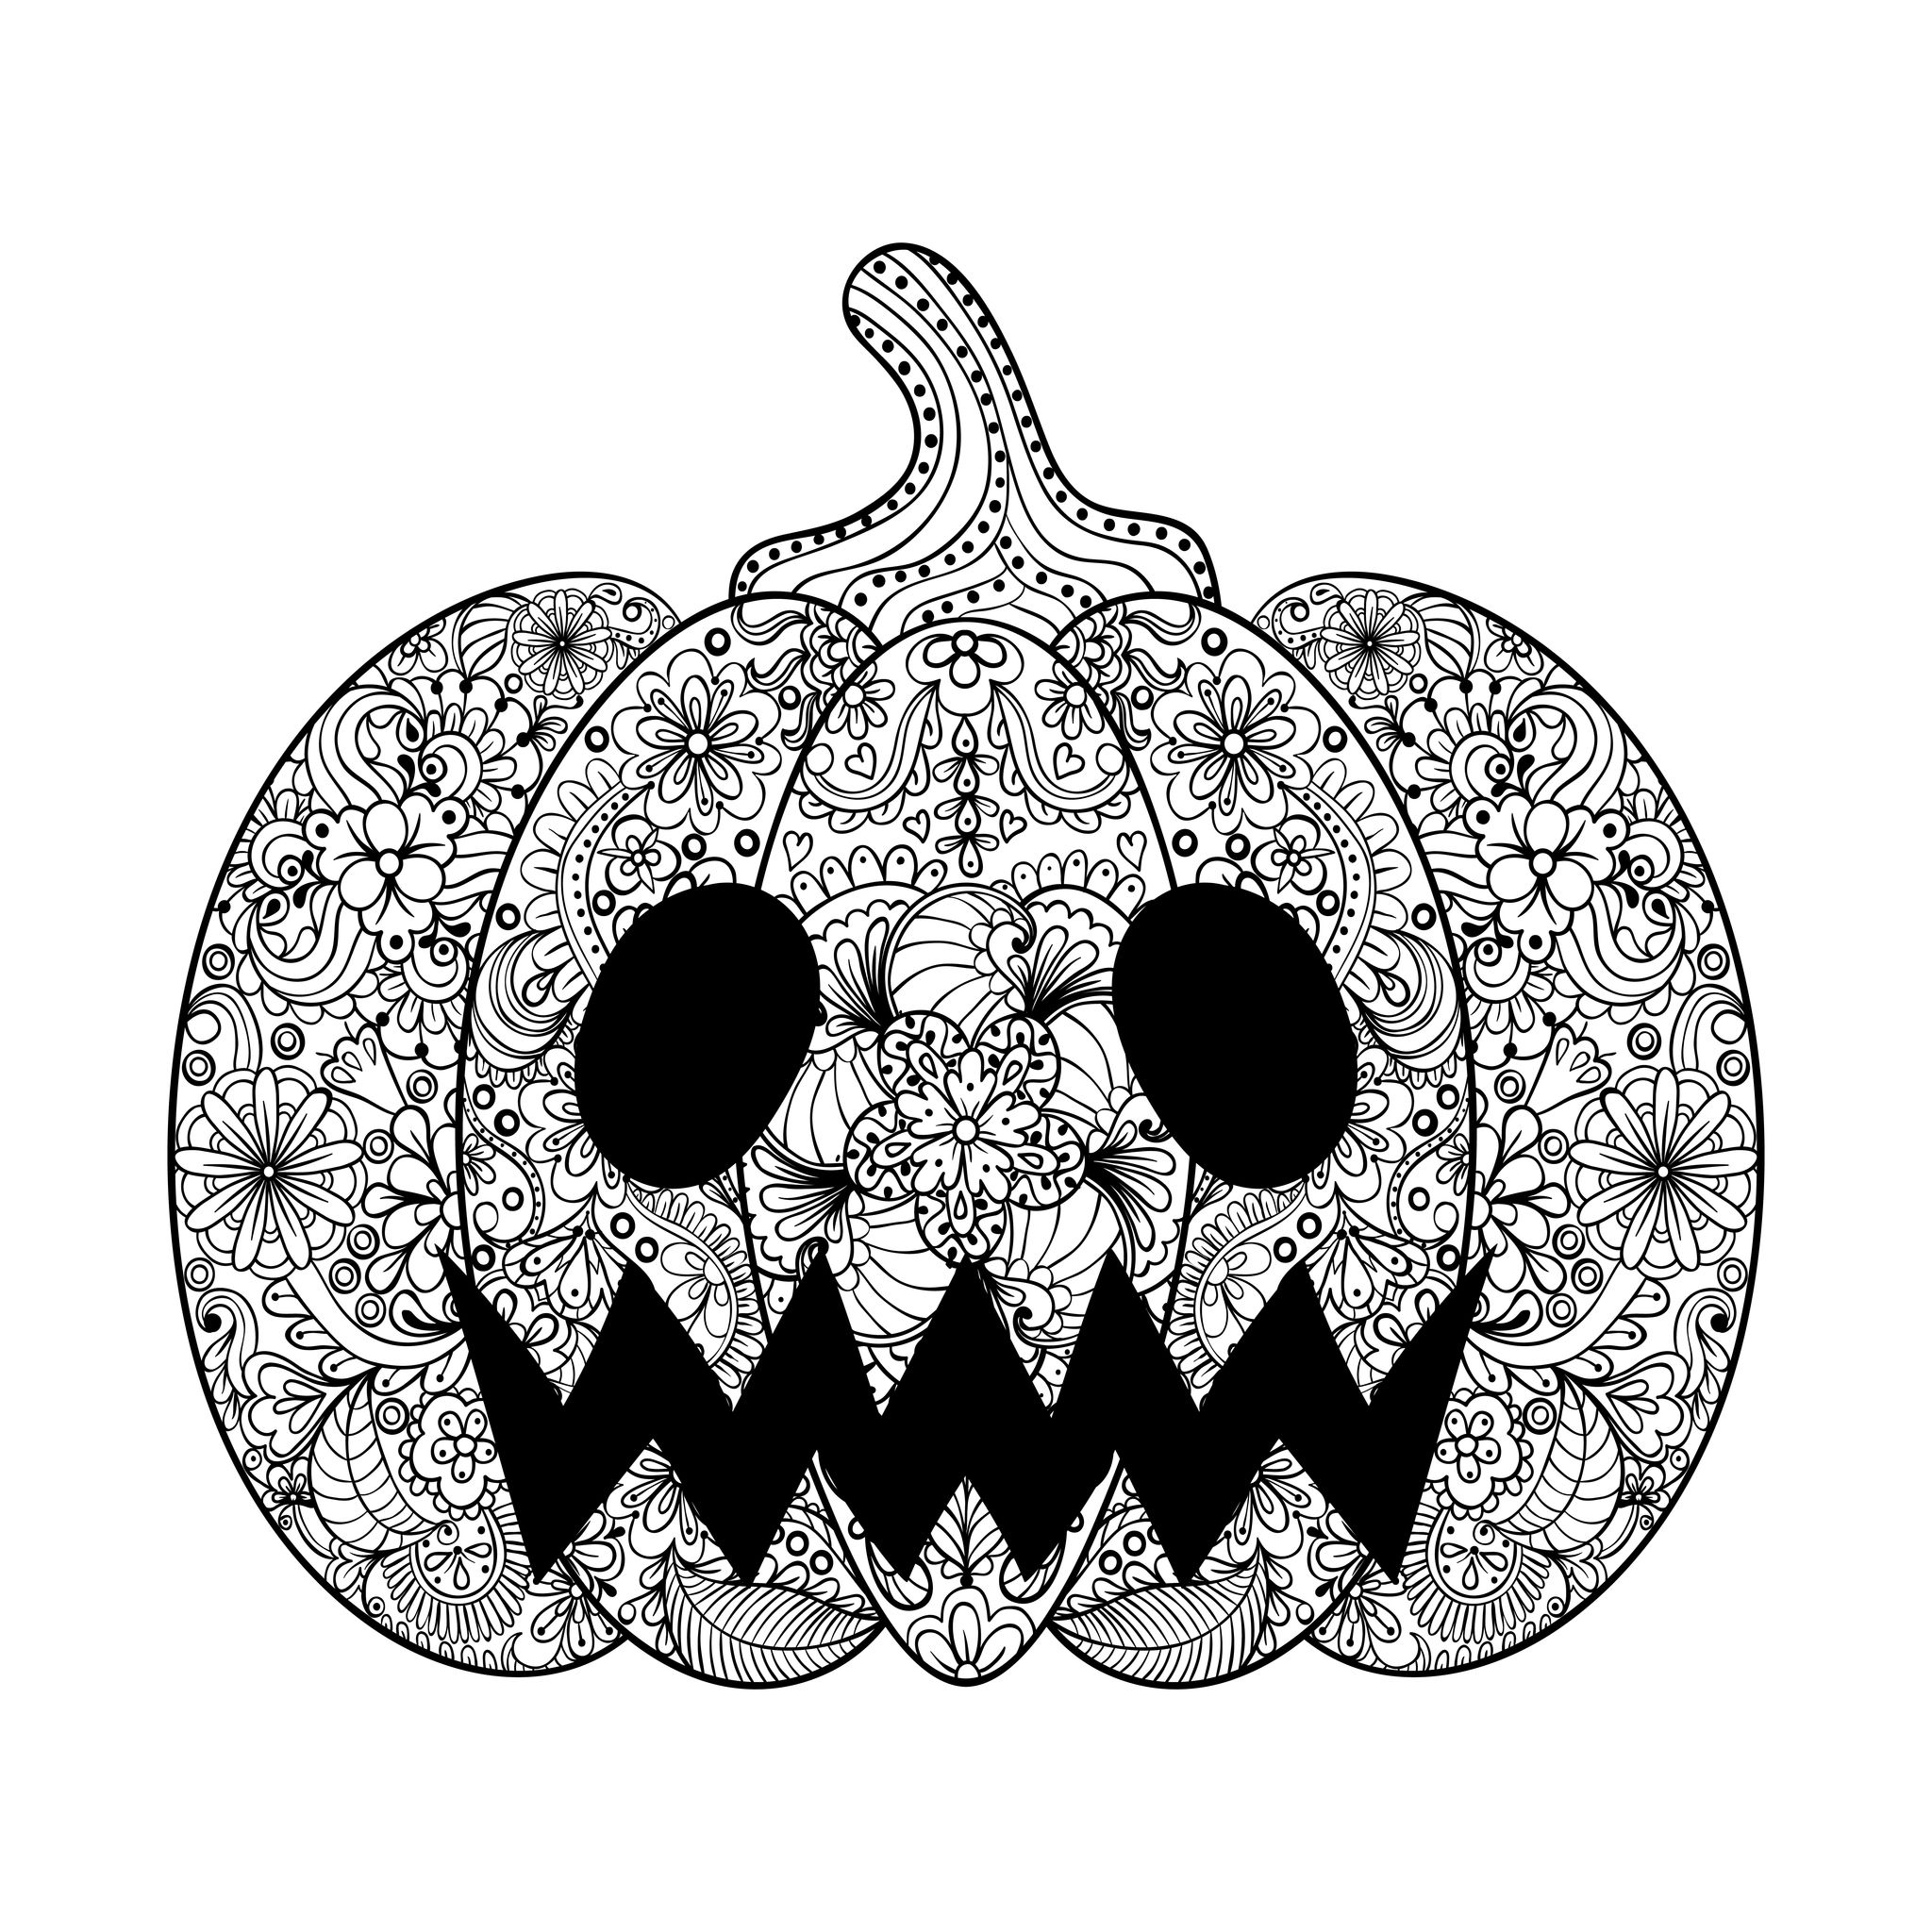 85 Cartoon Scary Halloween Pumpkin Coloring Pages with Animal character